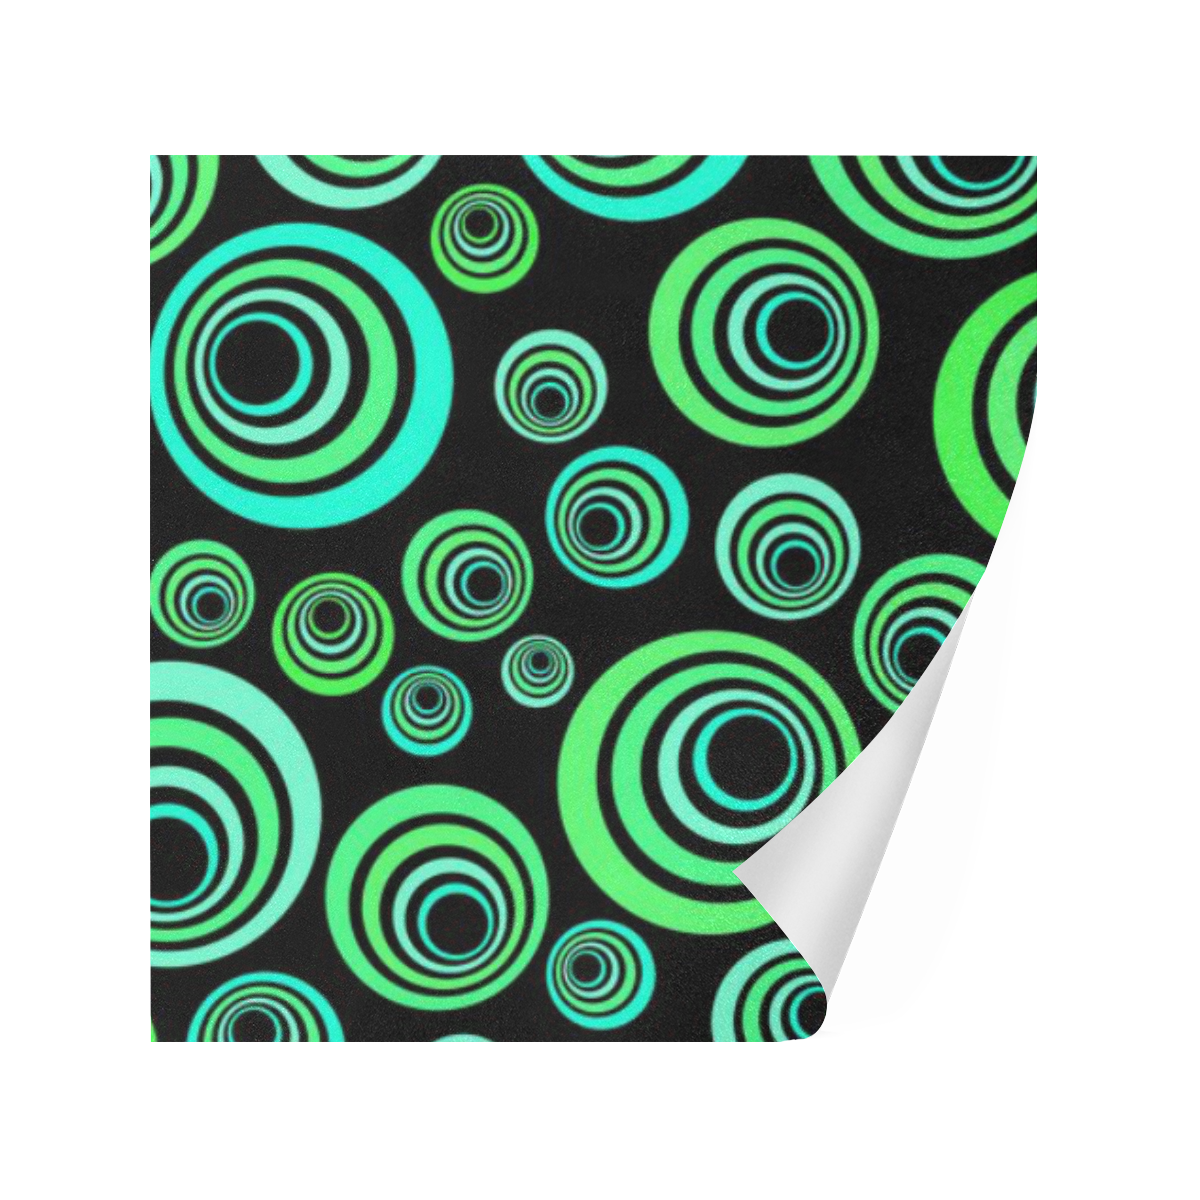 Crazy Fun Neon Blue & Green retro pattern Gift Wrapping Paper 58"x 23" (1 Roll)